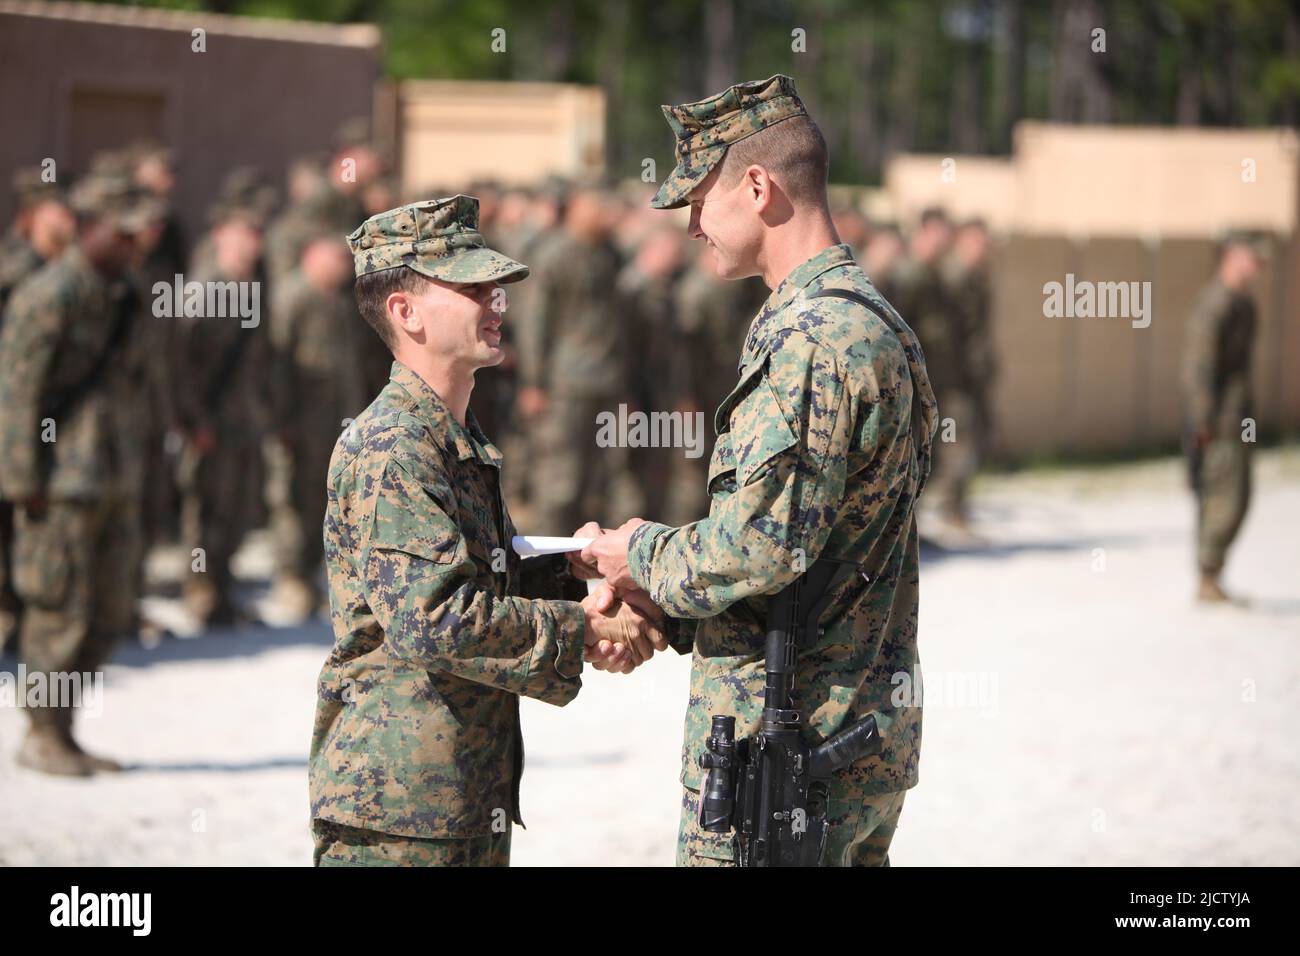 U.S. Marine Corps Corporal Christopher Metts (left) with Charlie Company, 1st Battalion, 8th Marine Regiment (1/8), 2D Marine Division, receives his p Stock Photo